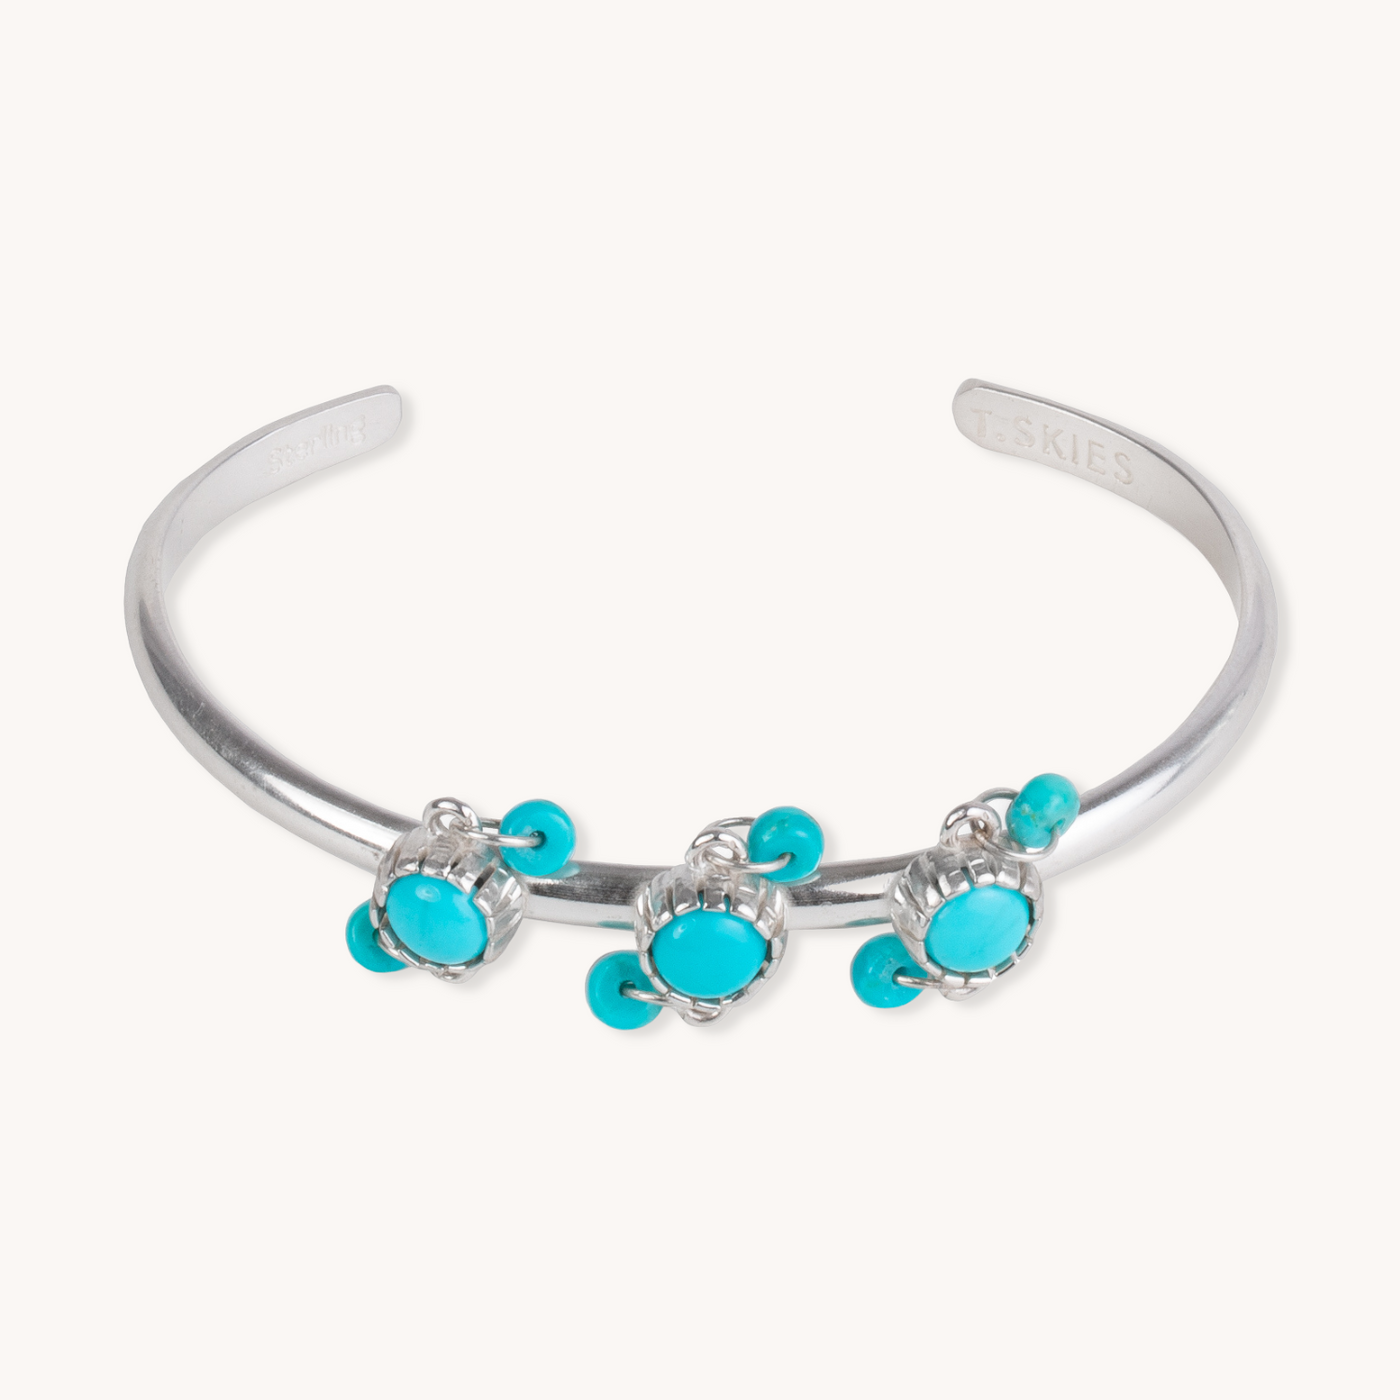 Silver and Turquoise Bracelet by TSkies